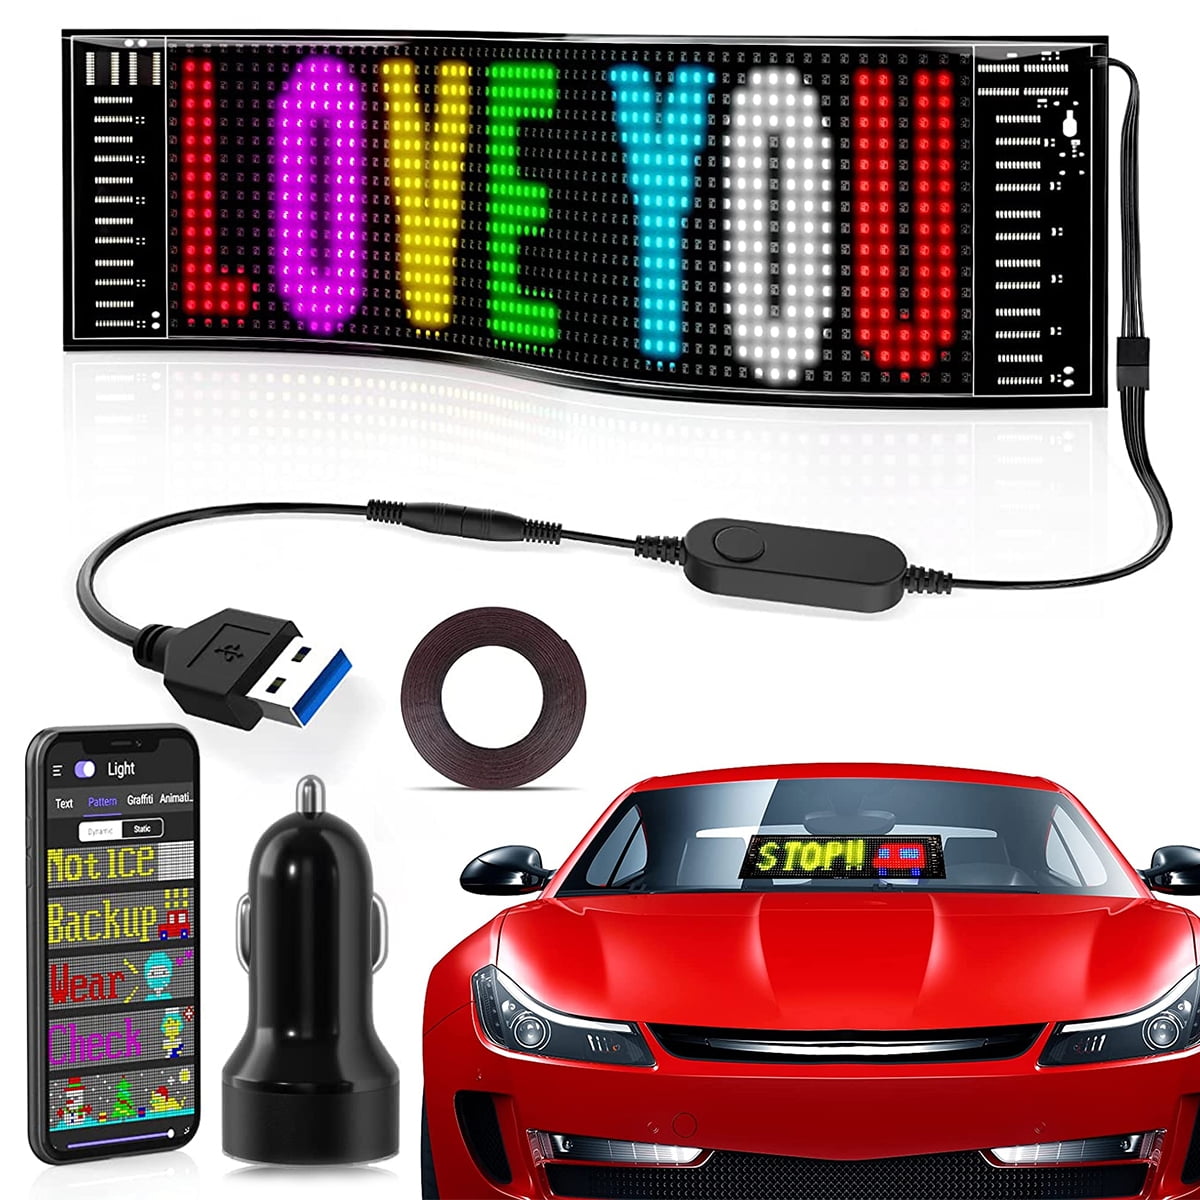 Upgraded LED Display Screen Controlled Open LED Sign Bluetooth App Car LED Display Screen Picture Lights & Mini Accent Spotlights 